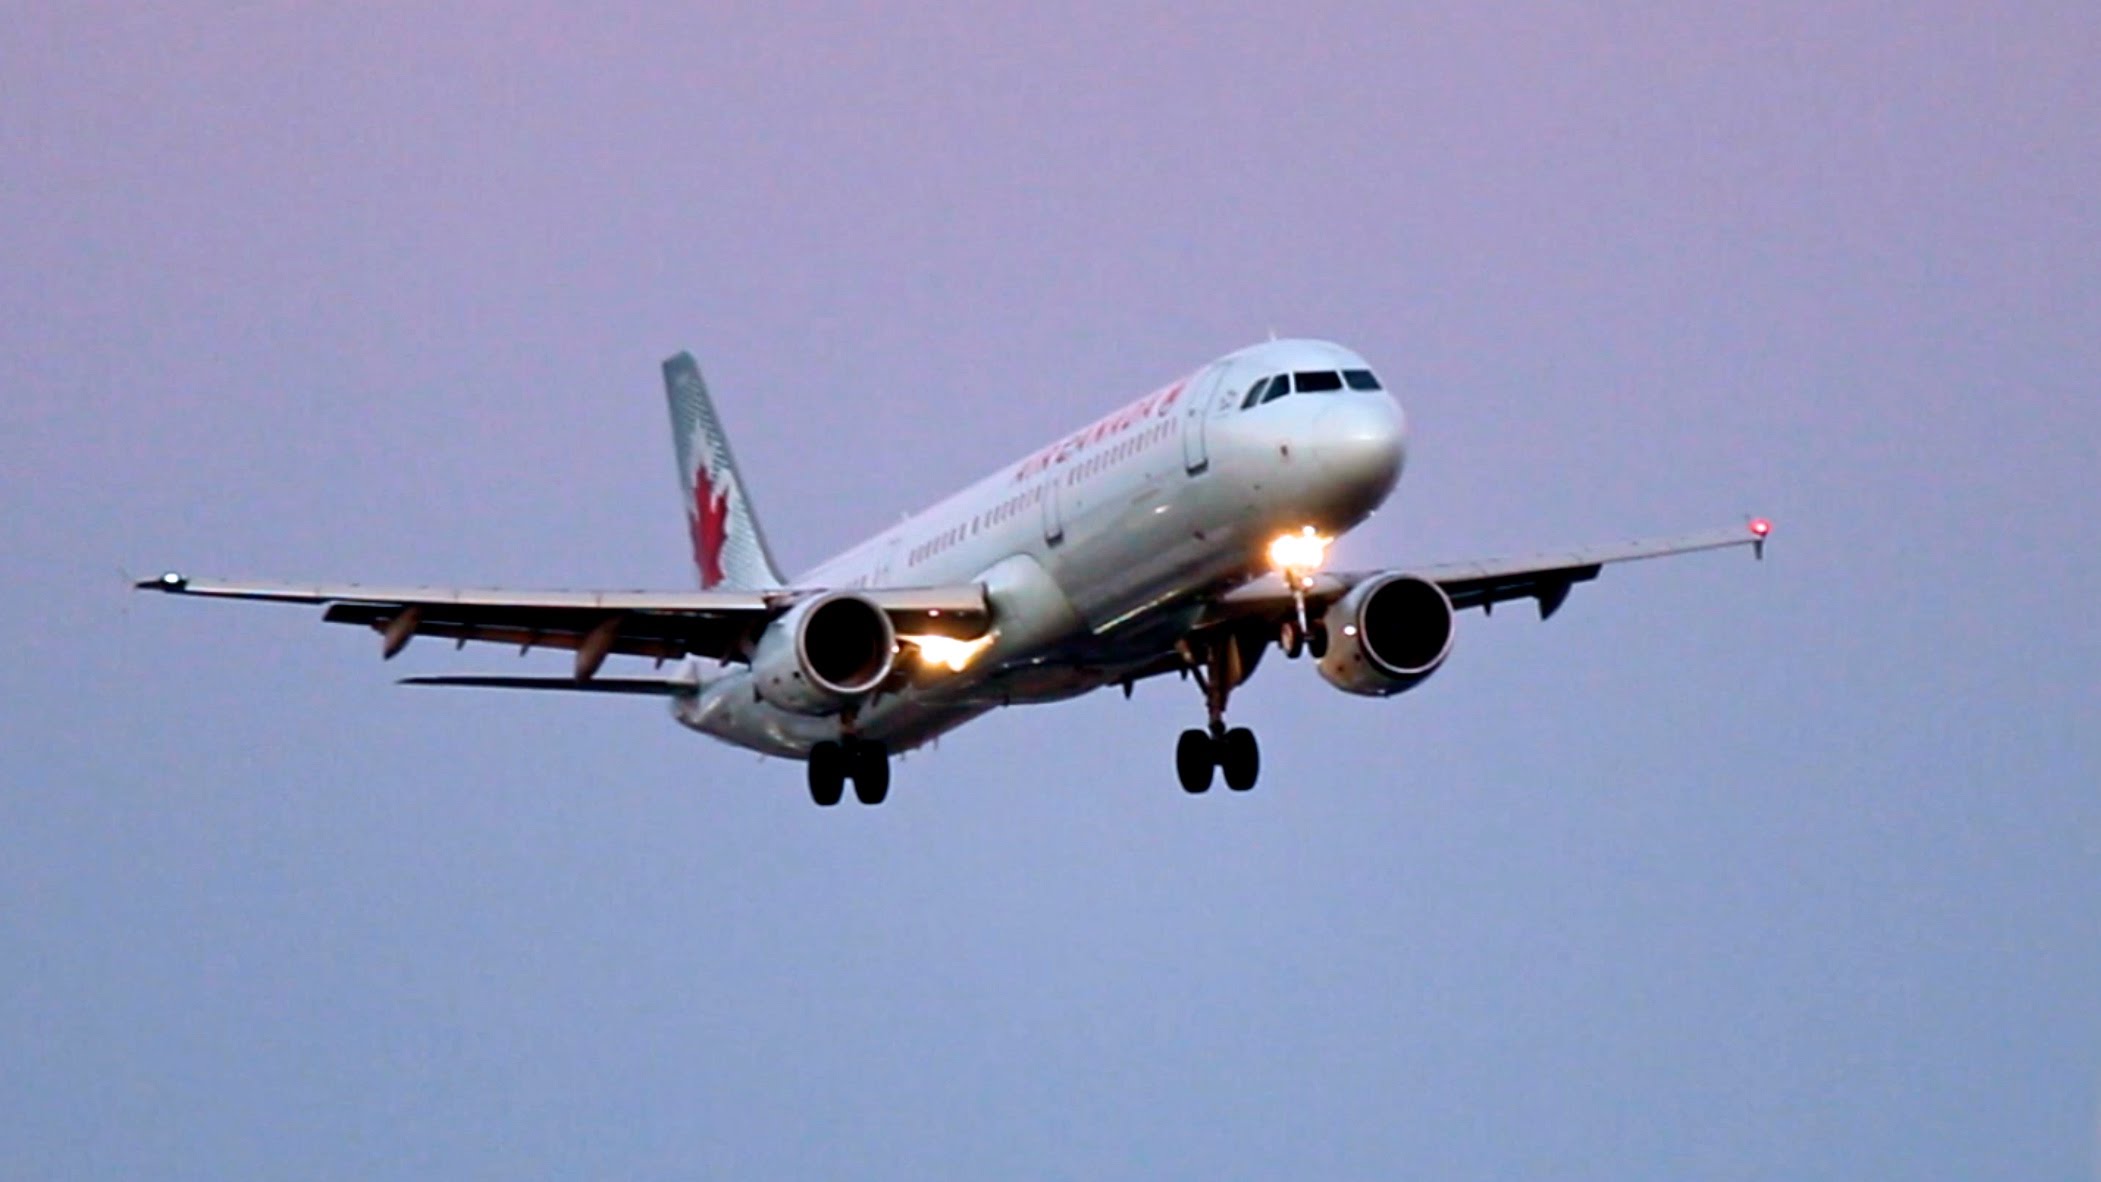 Red Sky Arrivals on Runway 23 at Toronto Pearson